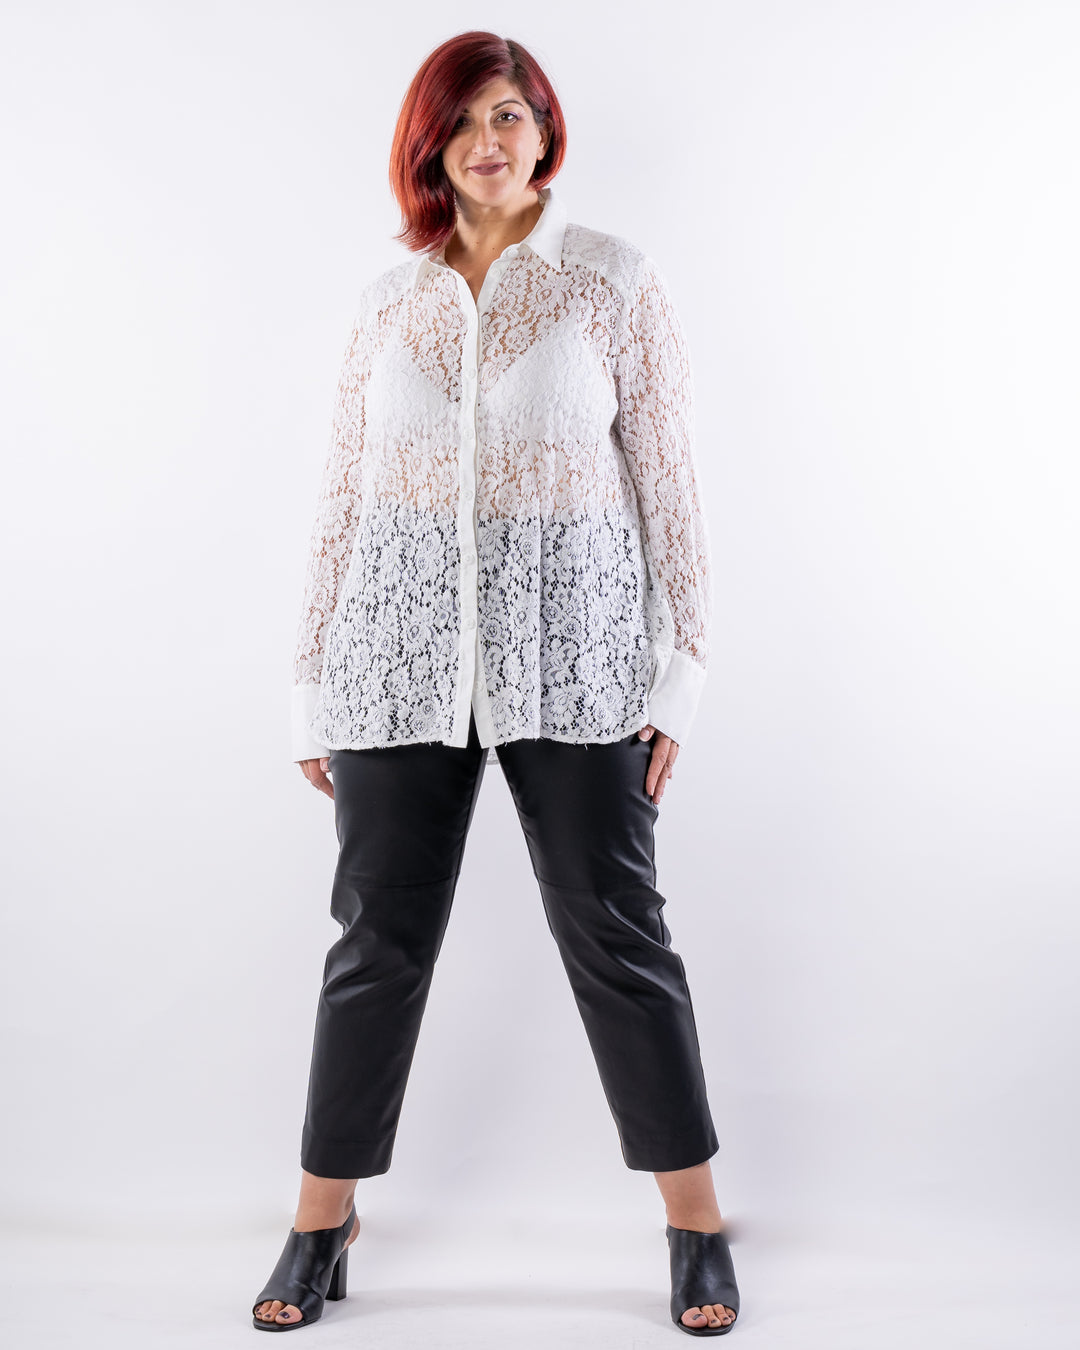 Heart of Glass Lace Shirt - White